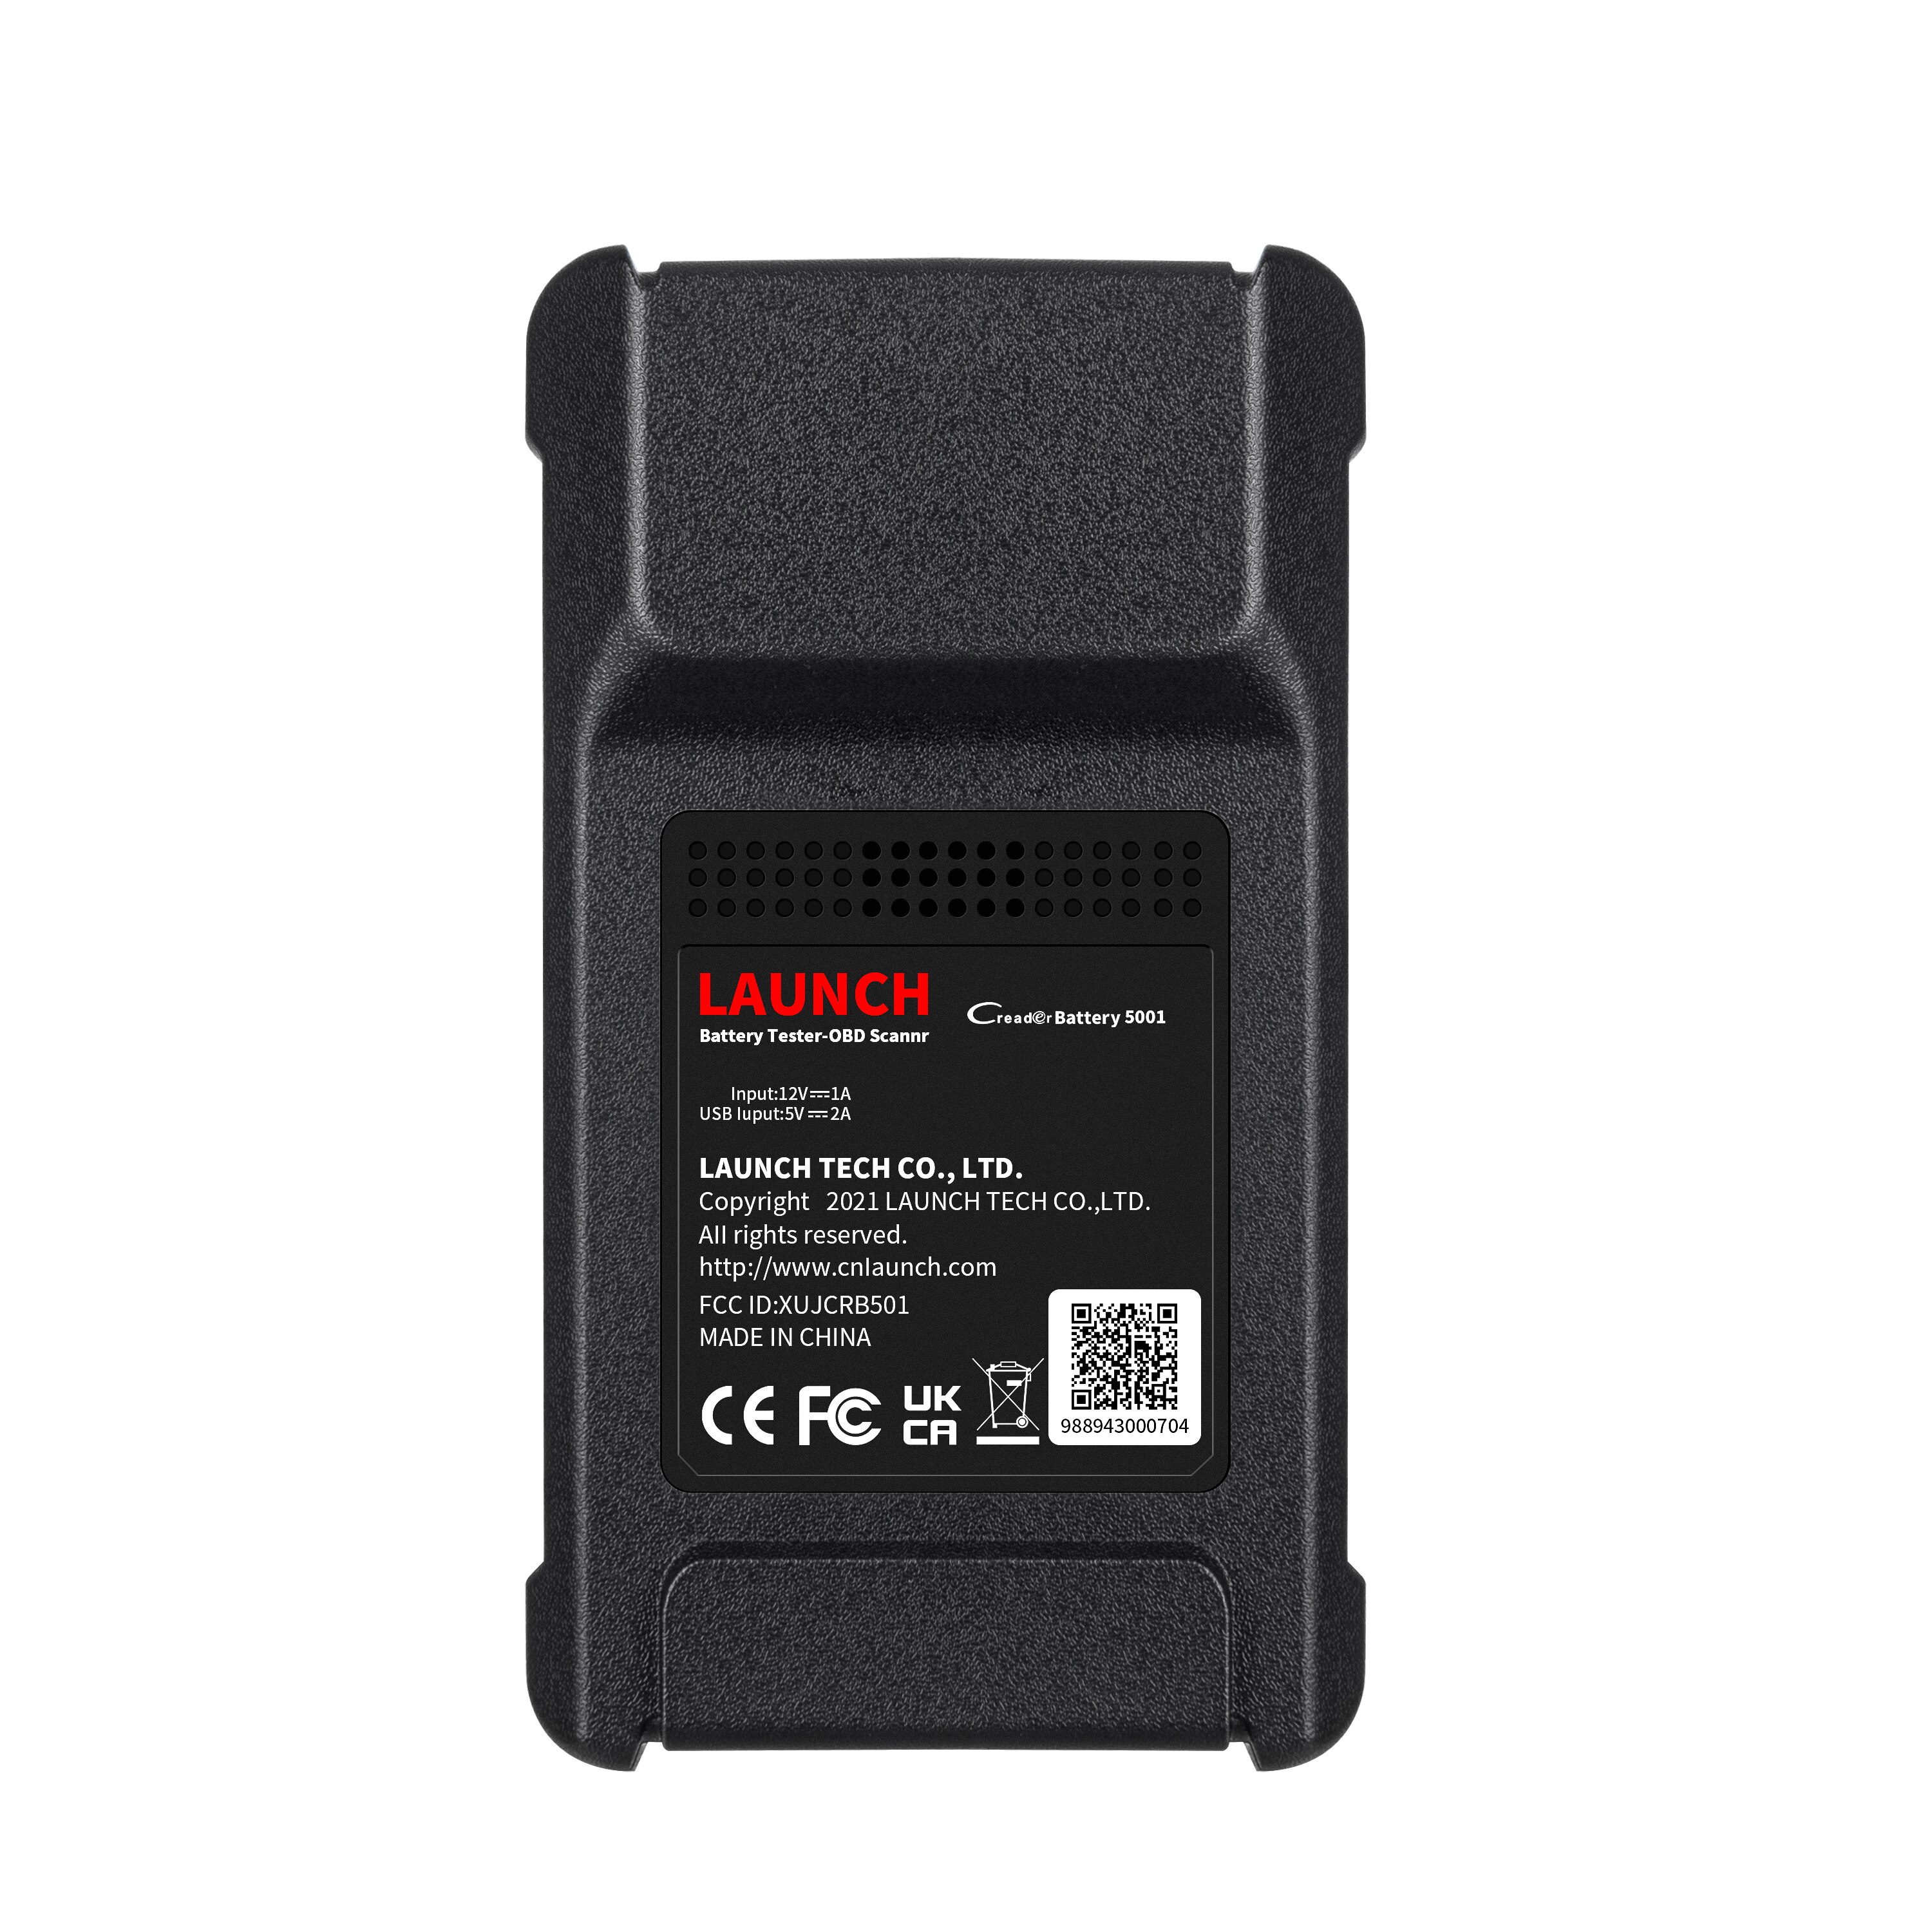 LAUNCH-X431-CRB5001OBD2-Scanner-12V-Car-Battery-Tester-Auto-ENG-ABS-SRS-AT-Diagnostic-Tools-OIL-BMS-TPMS-6-Reset-Free-Update-pk-1005004388023273